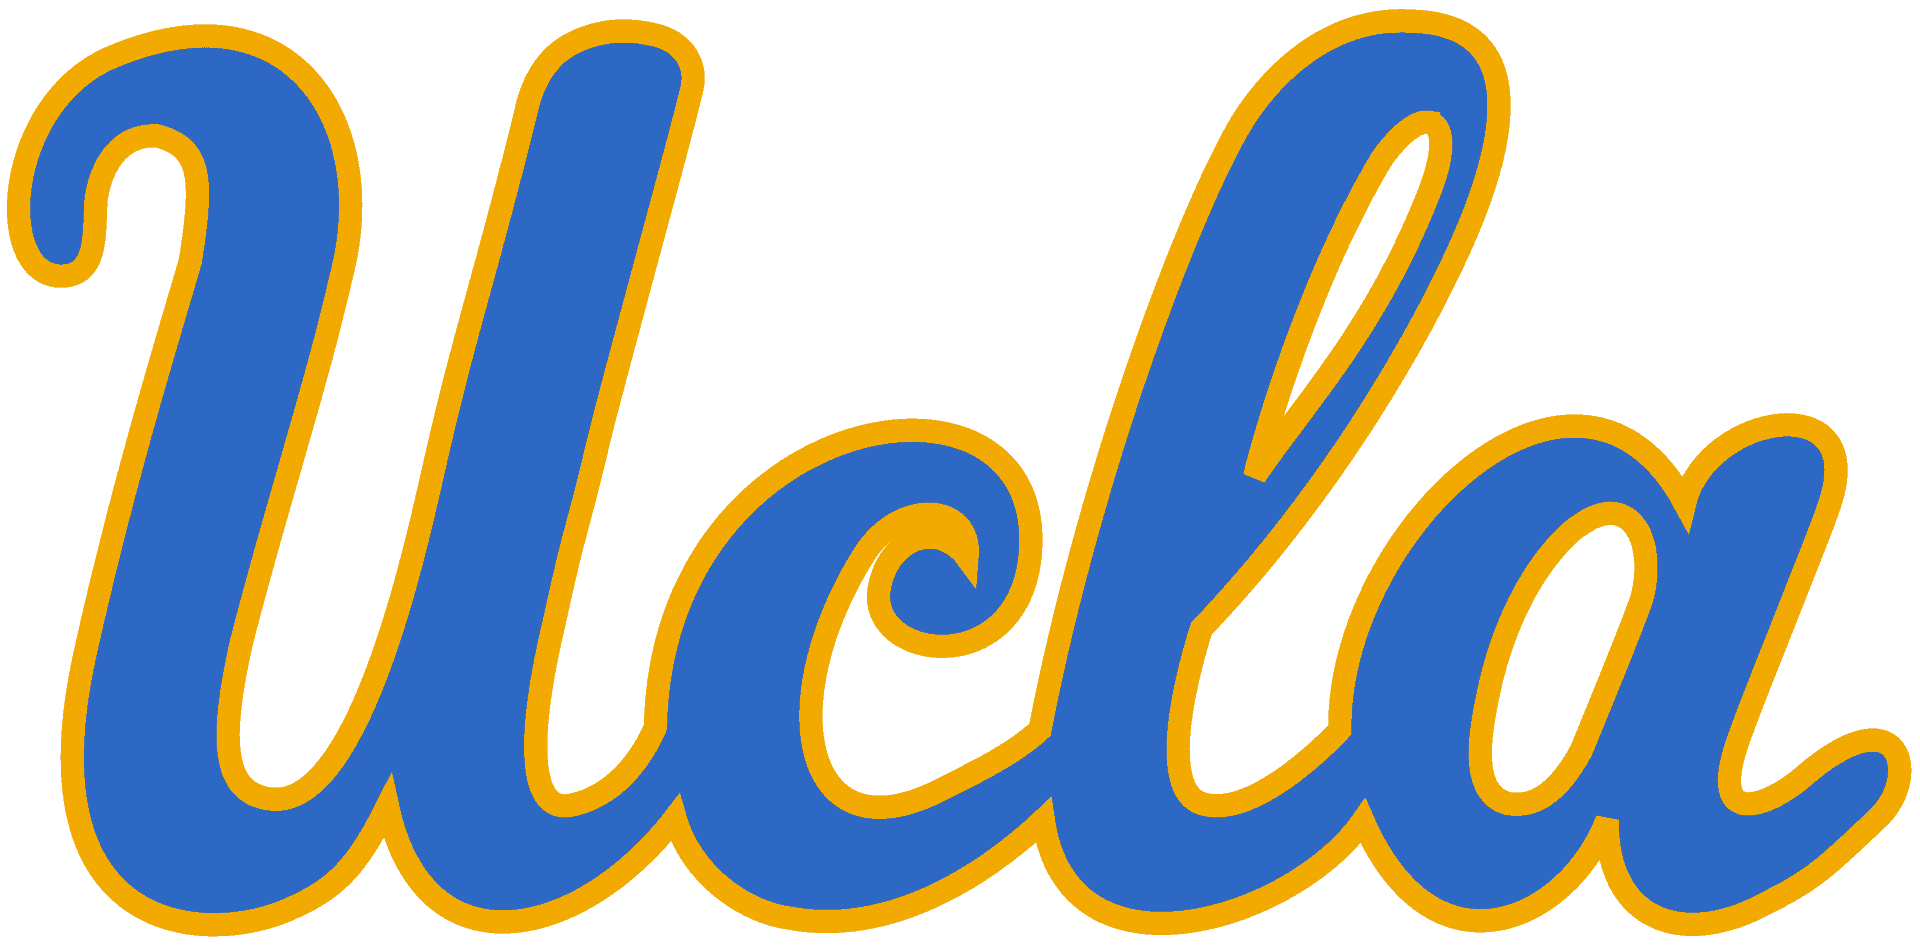 legally betting on the UCLA Bruins odds to win